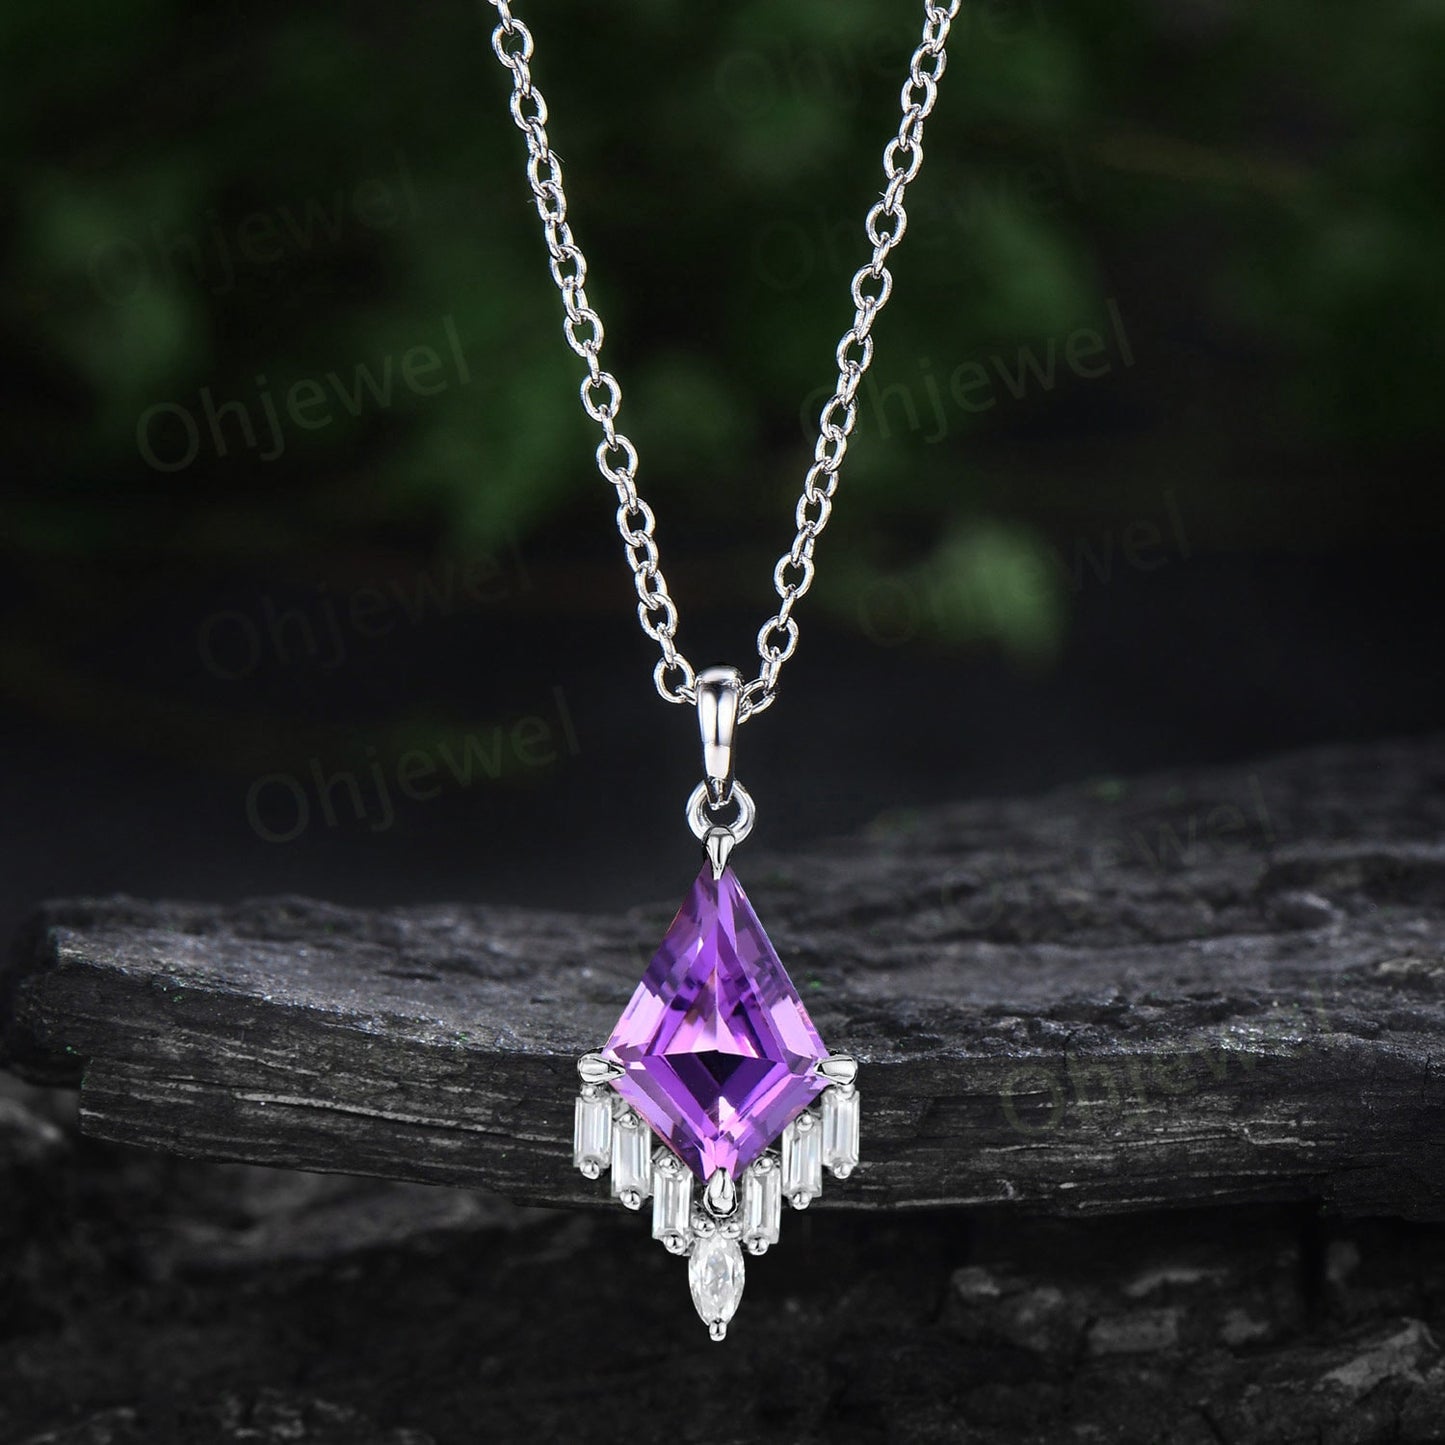 Kite purple amethyst necklace rose gold vintage February birthstone marquise baguette moissanite dainty unique necklace pendant women gift